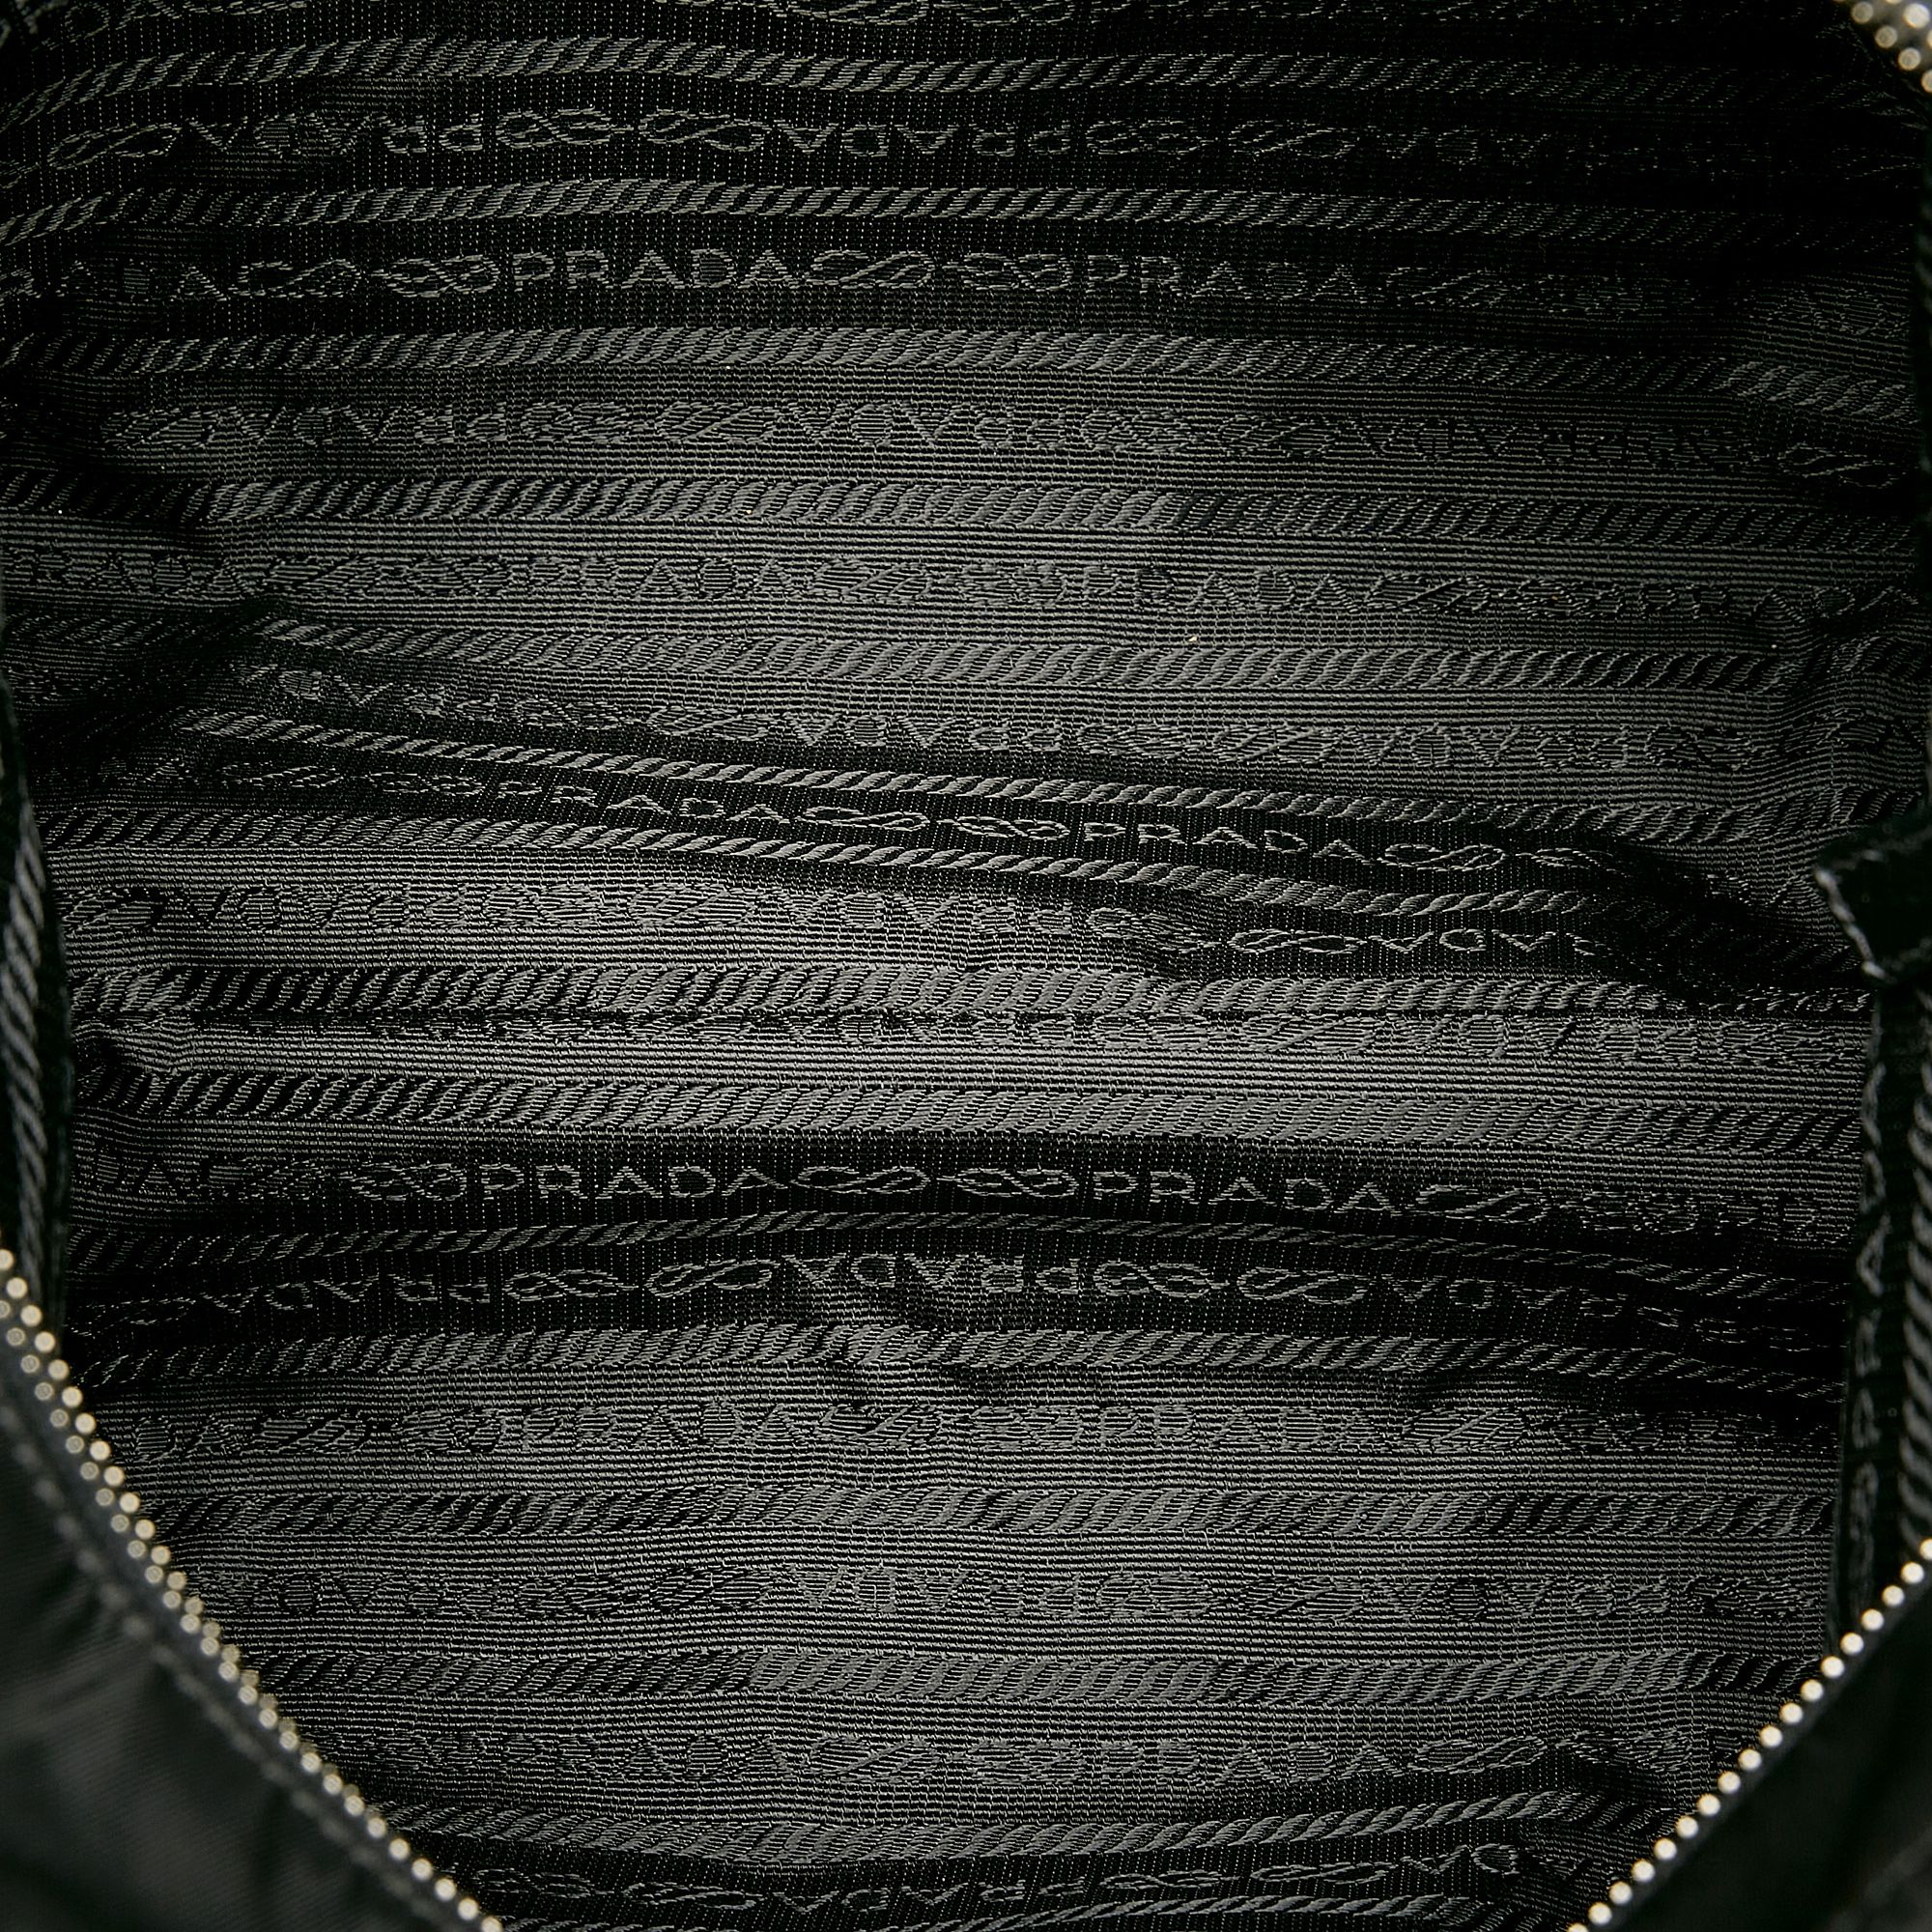 VINTAGE. RRP AS NEW. This shoulder bag features a nylon body with leather trim, an exterior front slip pocket, flat leather handles, a top zip closure, and an interior zip pocket.Exterior back is discolored, out of shape and scratched. Exterior bottom is discolored, out of shape and scratched. Exterior front is discolored, out of shape and scratched. Exterior handle is cracked, discolored, out of shape and scratched. Exterior side is discolored, out of shape and stained with others. Buckle is scratched. Zipper is scratched.

Dimensions:
Length 24cm
Width 35cm
Depth 10cm
Shoulder Drop 20cm

Original Accessories: This item has no other original accessories.

Color: Black
Material: Fabric x Nylon x Leather x Calf
Country of Origin: Italy
Boutique Reference: SSU163652K1342


Product Rating: GoodCondition

Certificate of Authenticity is available upon request with no extra fee required. Please contact our customer service team.